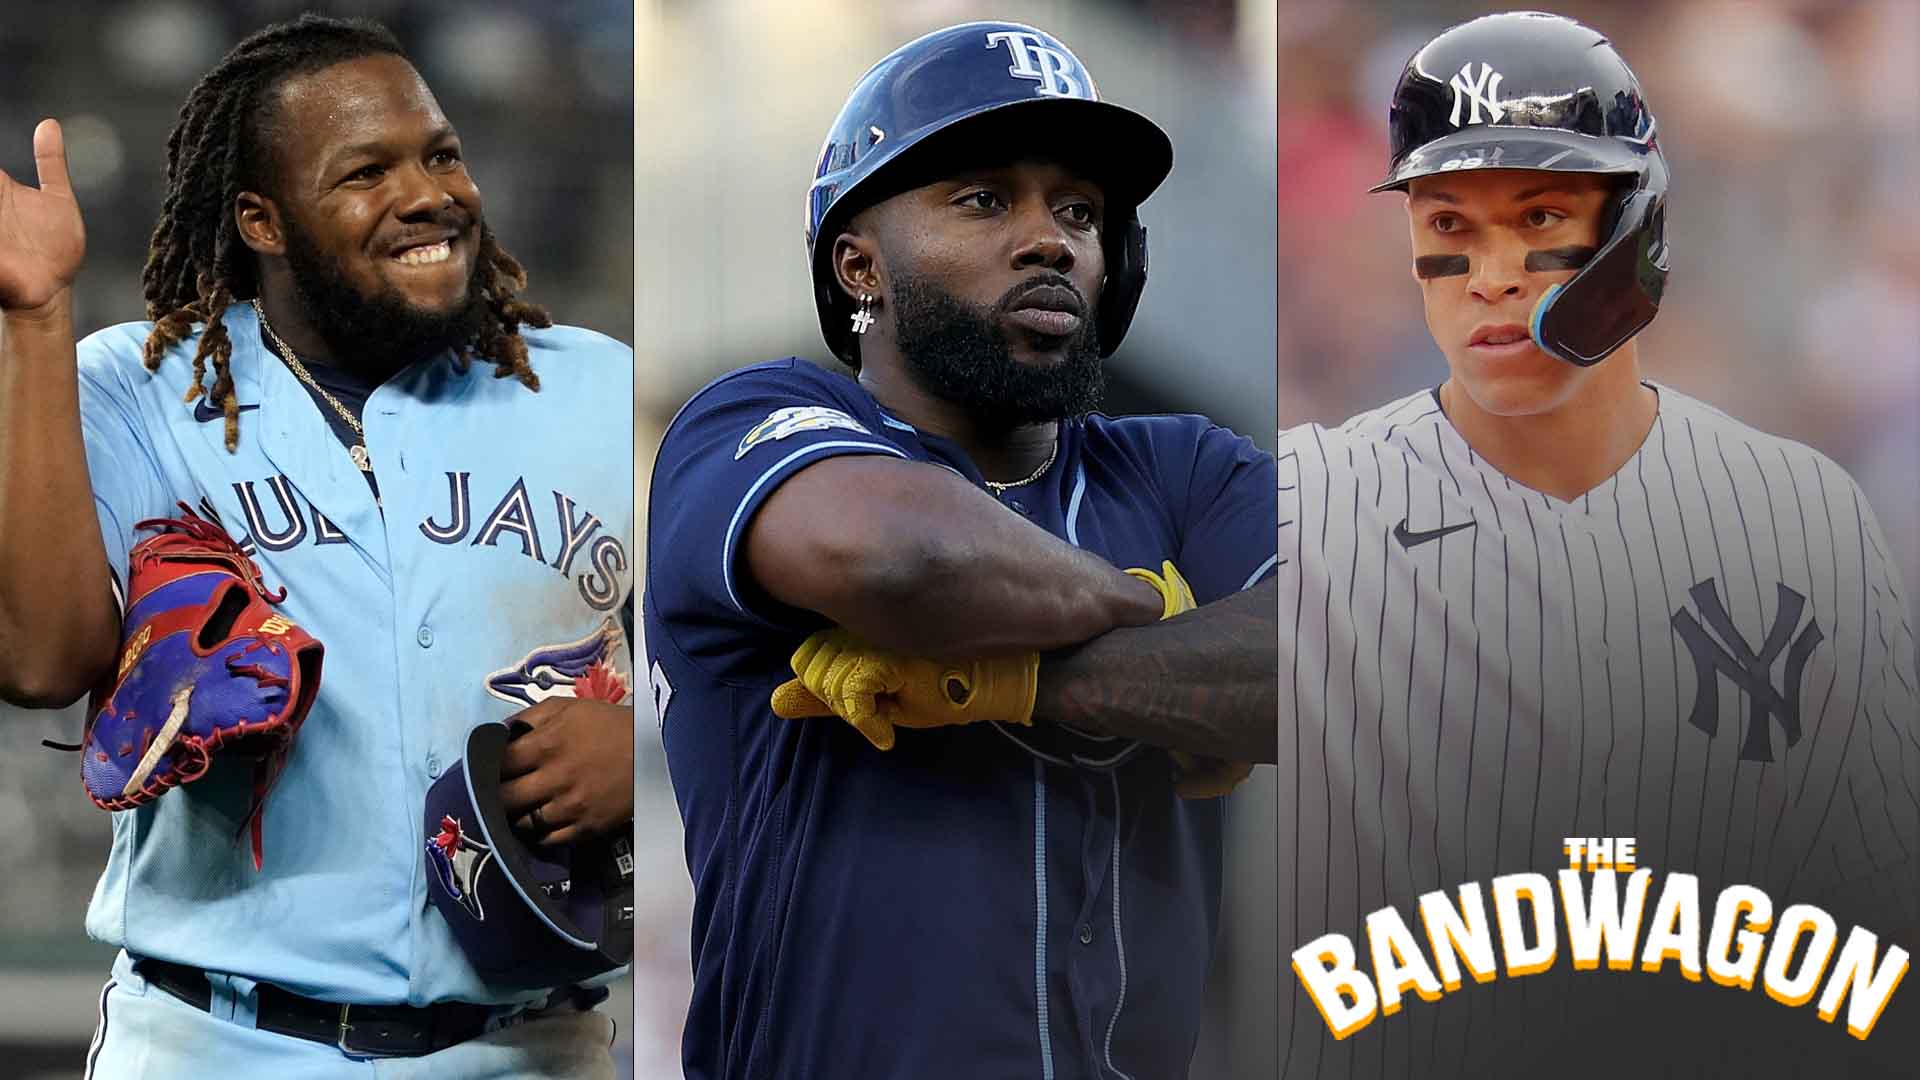 MLB players split on what jersey to wear during All-Star Game